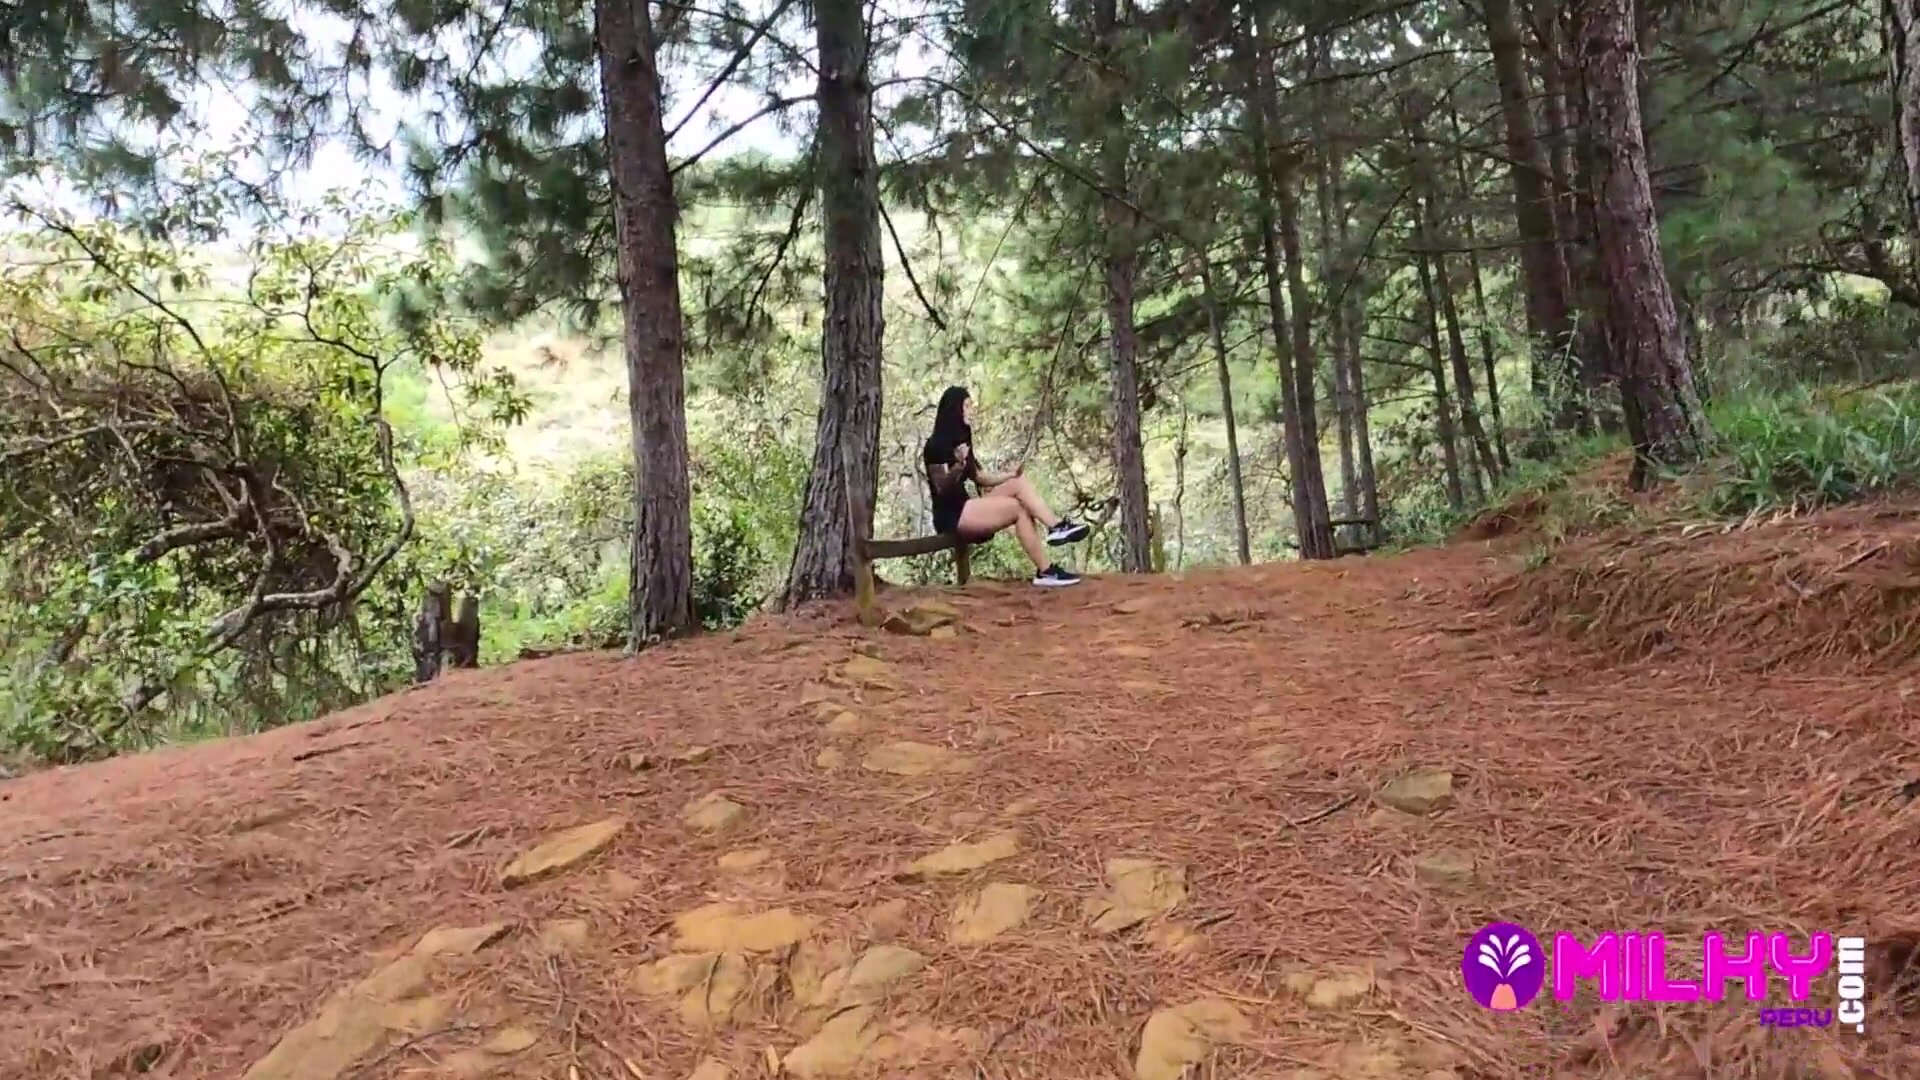 Salome Gil - Offering money to sexy girl in the forest in exchange for sex